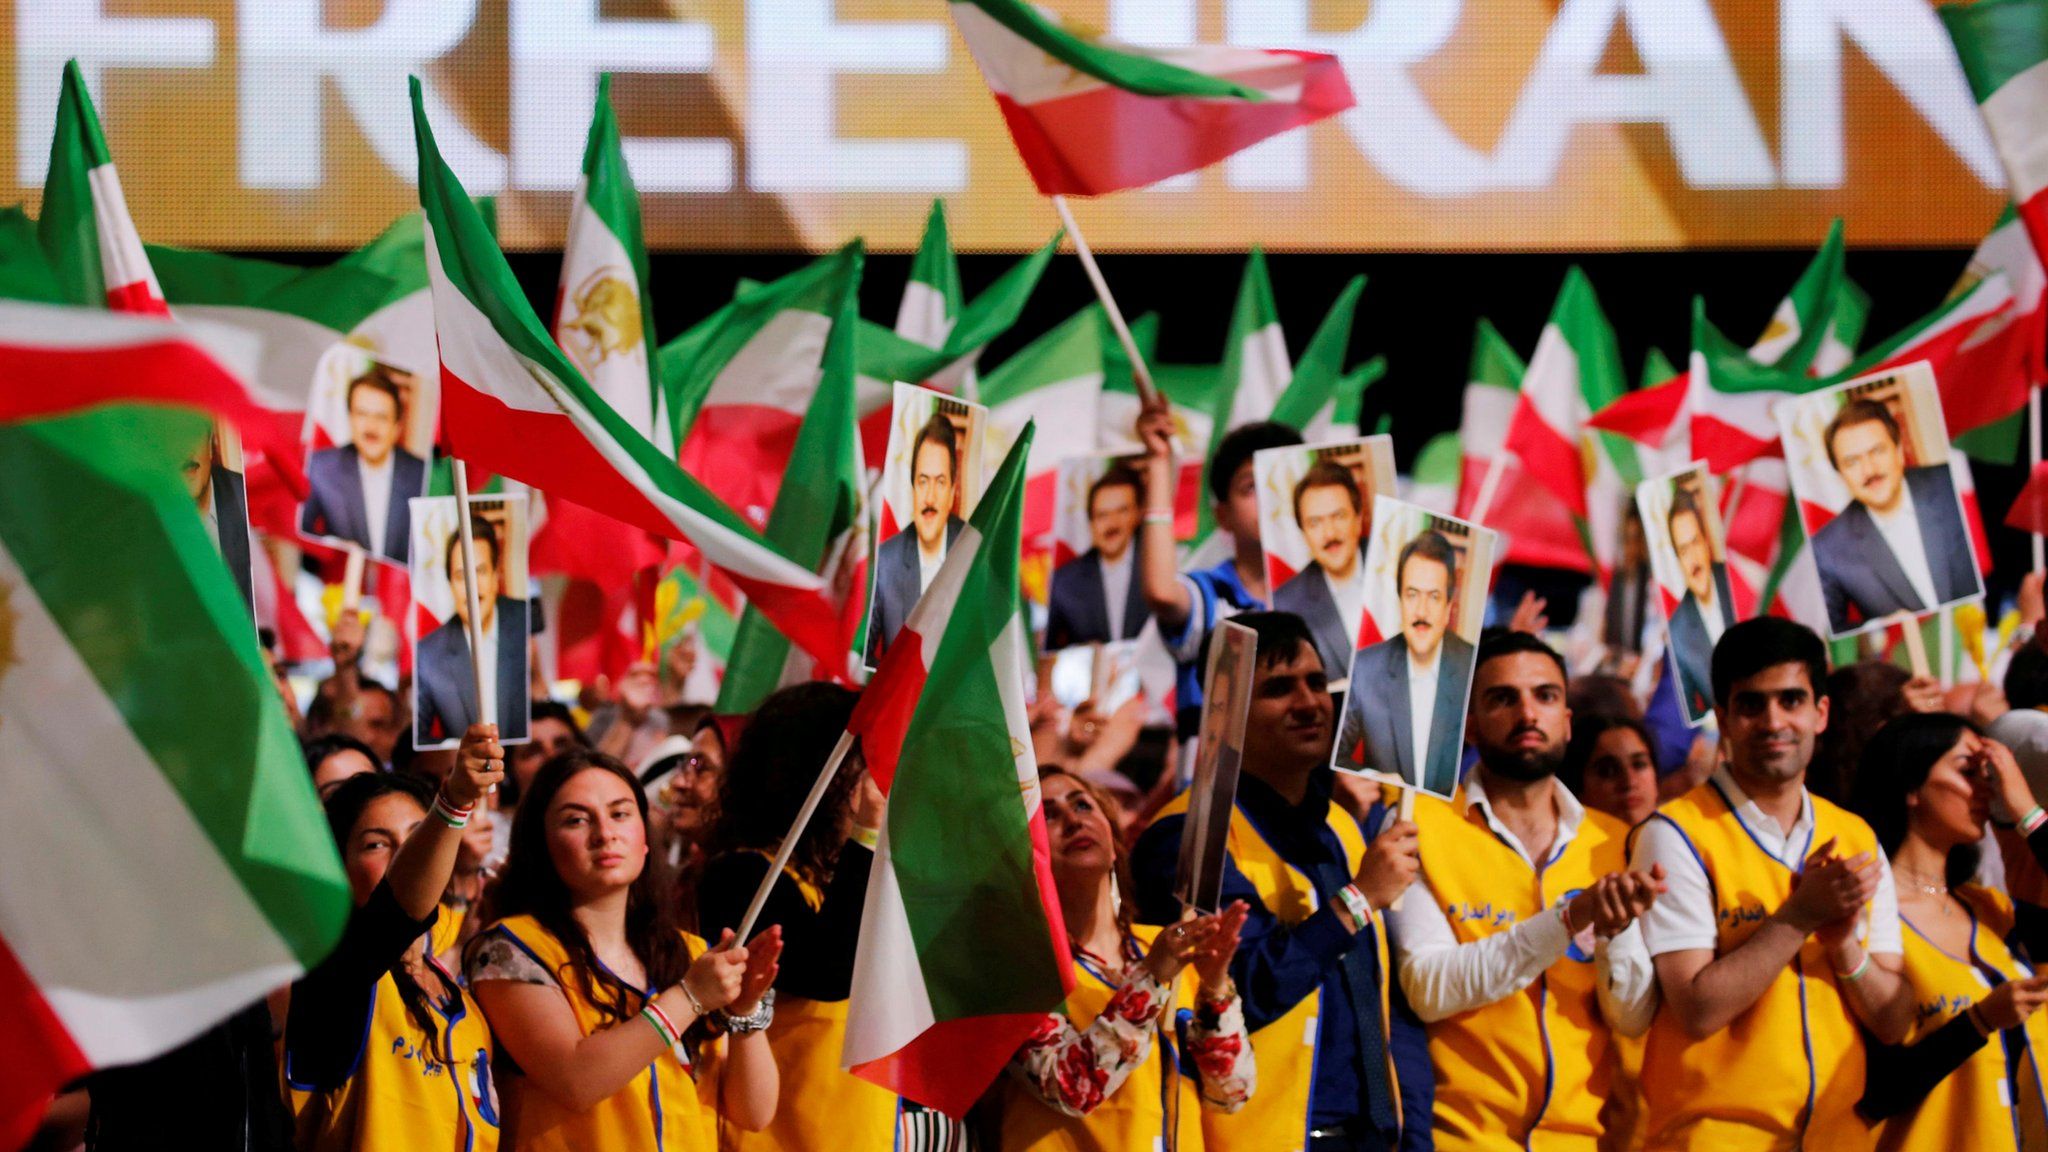 Supporters of the National Council of Resistance of Iran attend a rally in Villepinte, near Paris, France, June 30, 2018